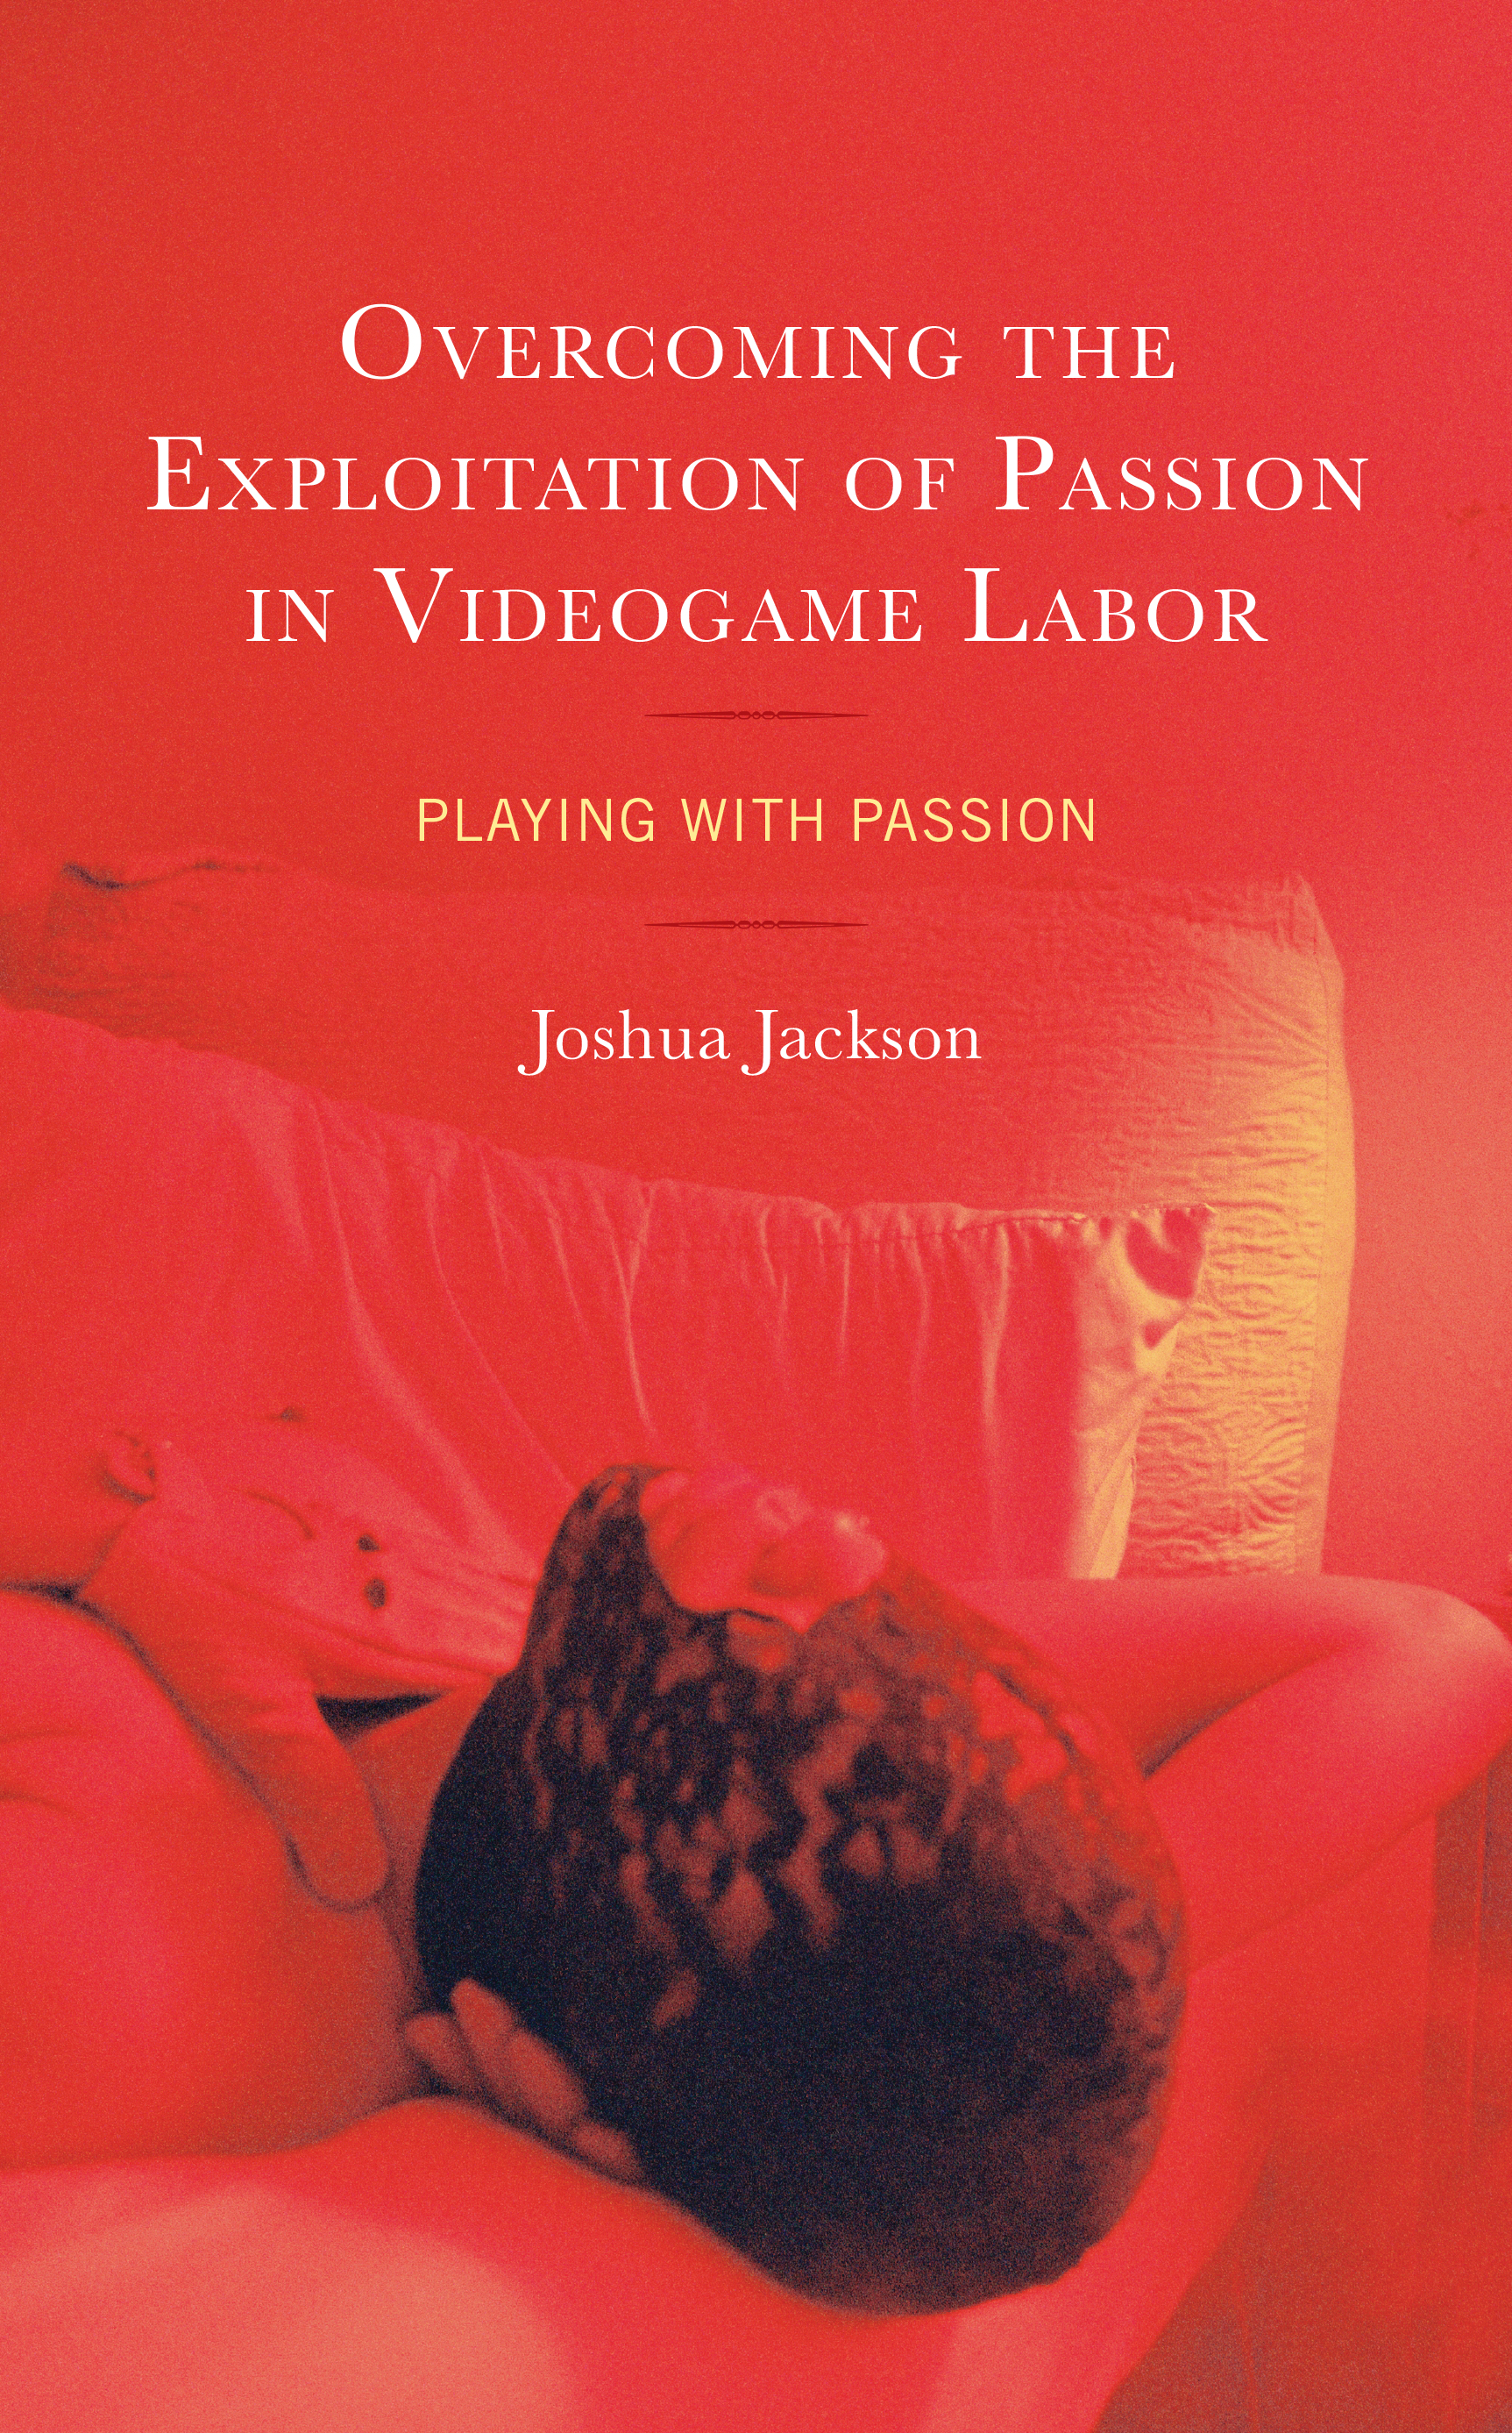 Overcoming the Exploitation of Passion in Videogame Labor: Playing with Passion